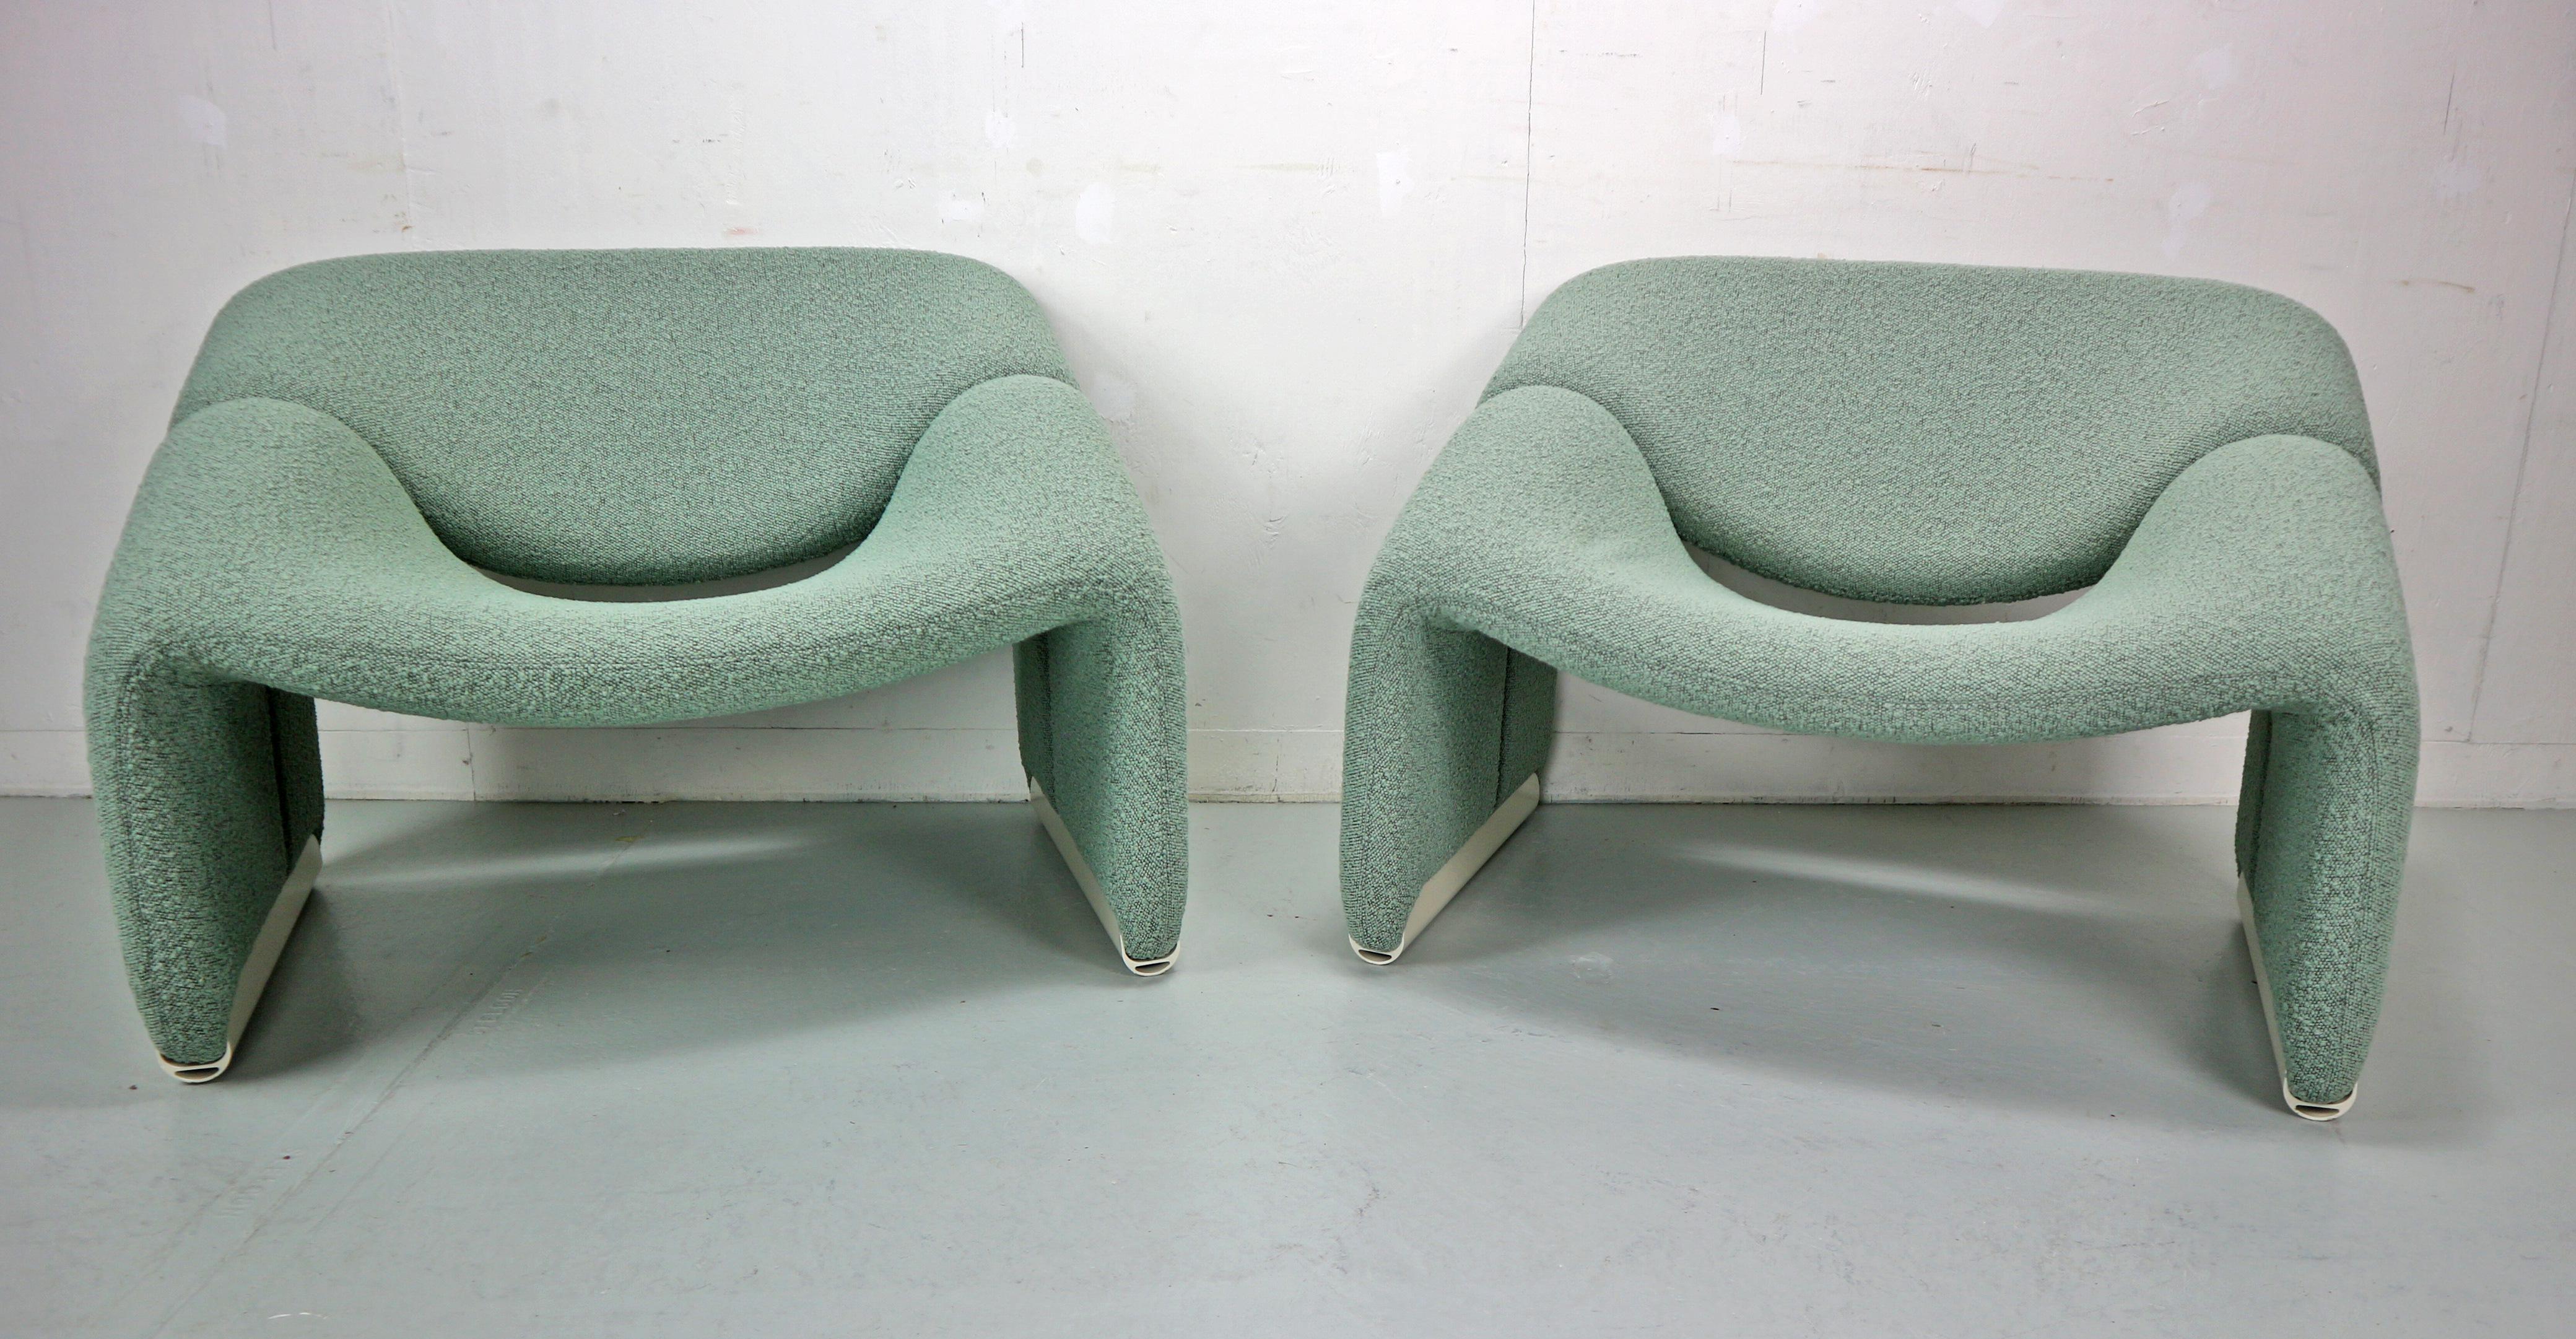 Set of 2 groovy lounge chairs designed by Pierre Paulin in 1972 and manufactured for Artifort, Holland.
Model No: F598, or also known as 